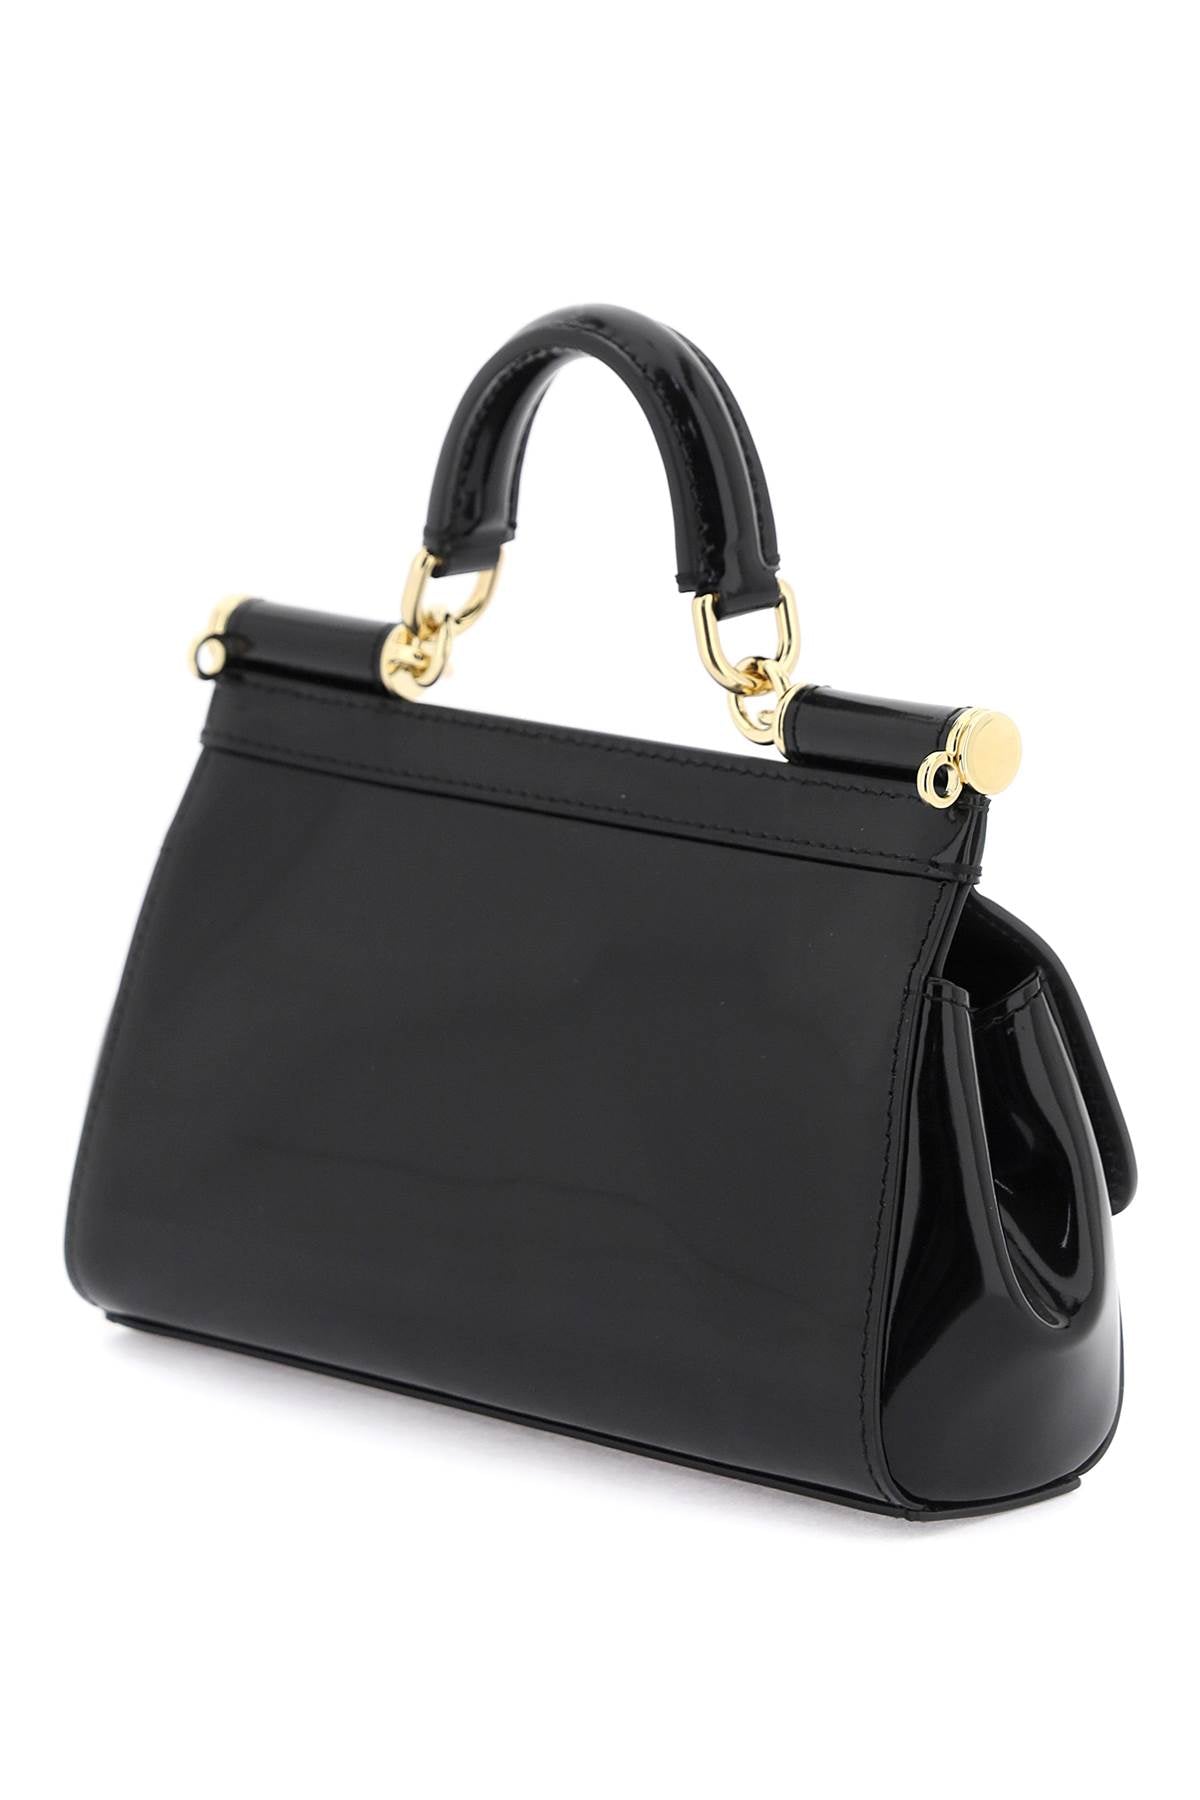 DOLCE & GABBANA Mini Sicily Patent Leather Handbag with Leopard Lining and Adjustable Strap - Black